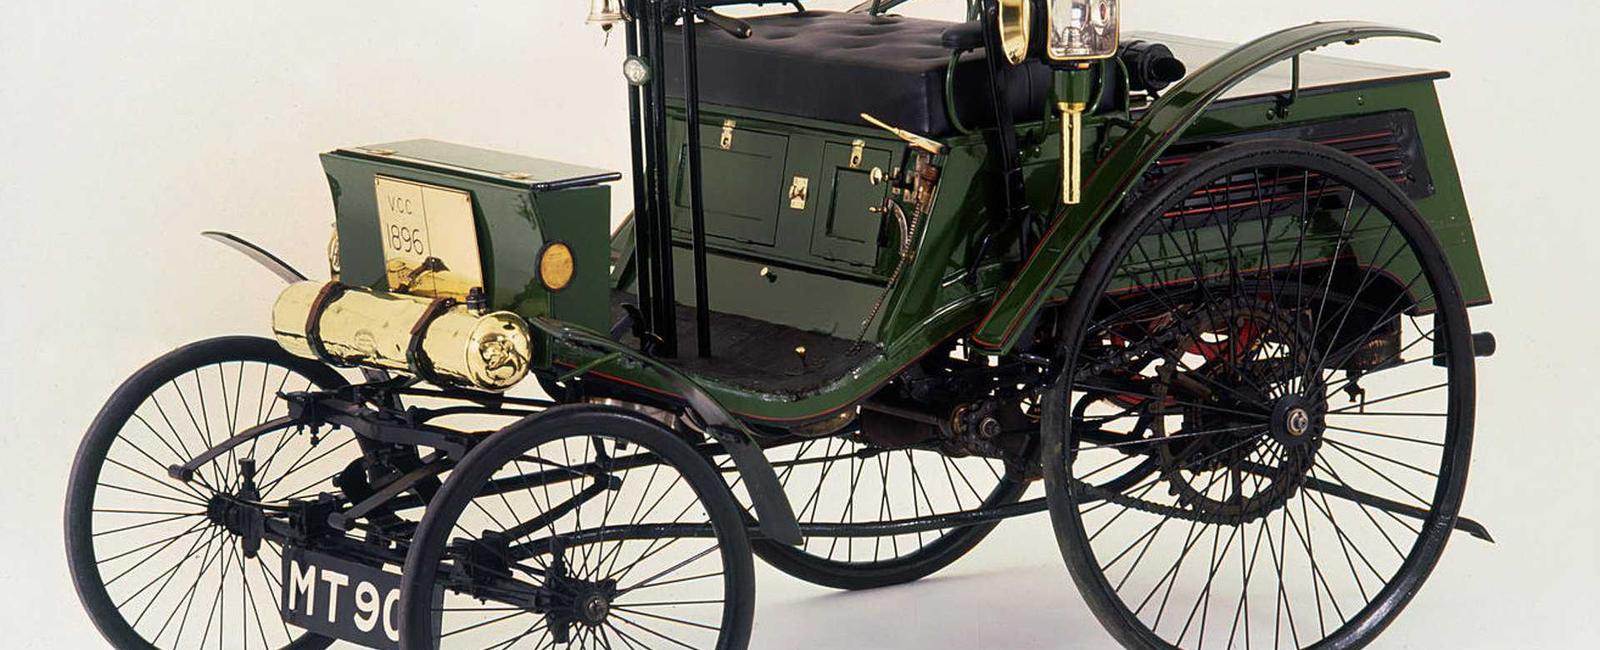 British police issued the world s first ever speeding ticket in 1896 to a benz that went 8 mph since the speed limit was only 2 mph the car was over 4 times the speed limit